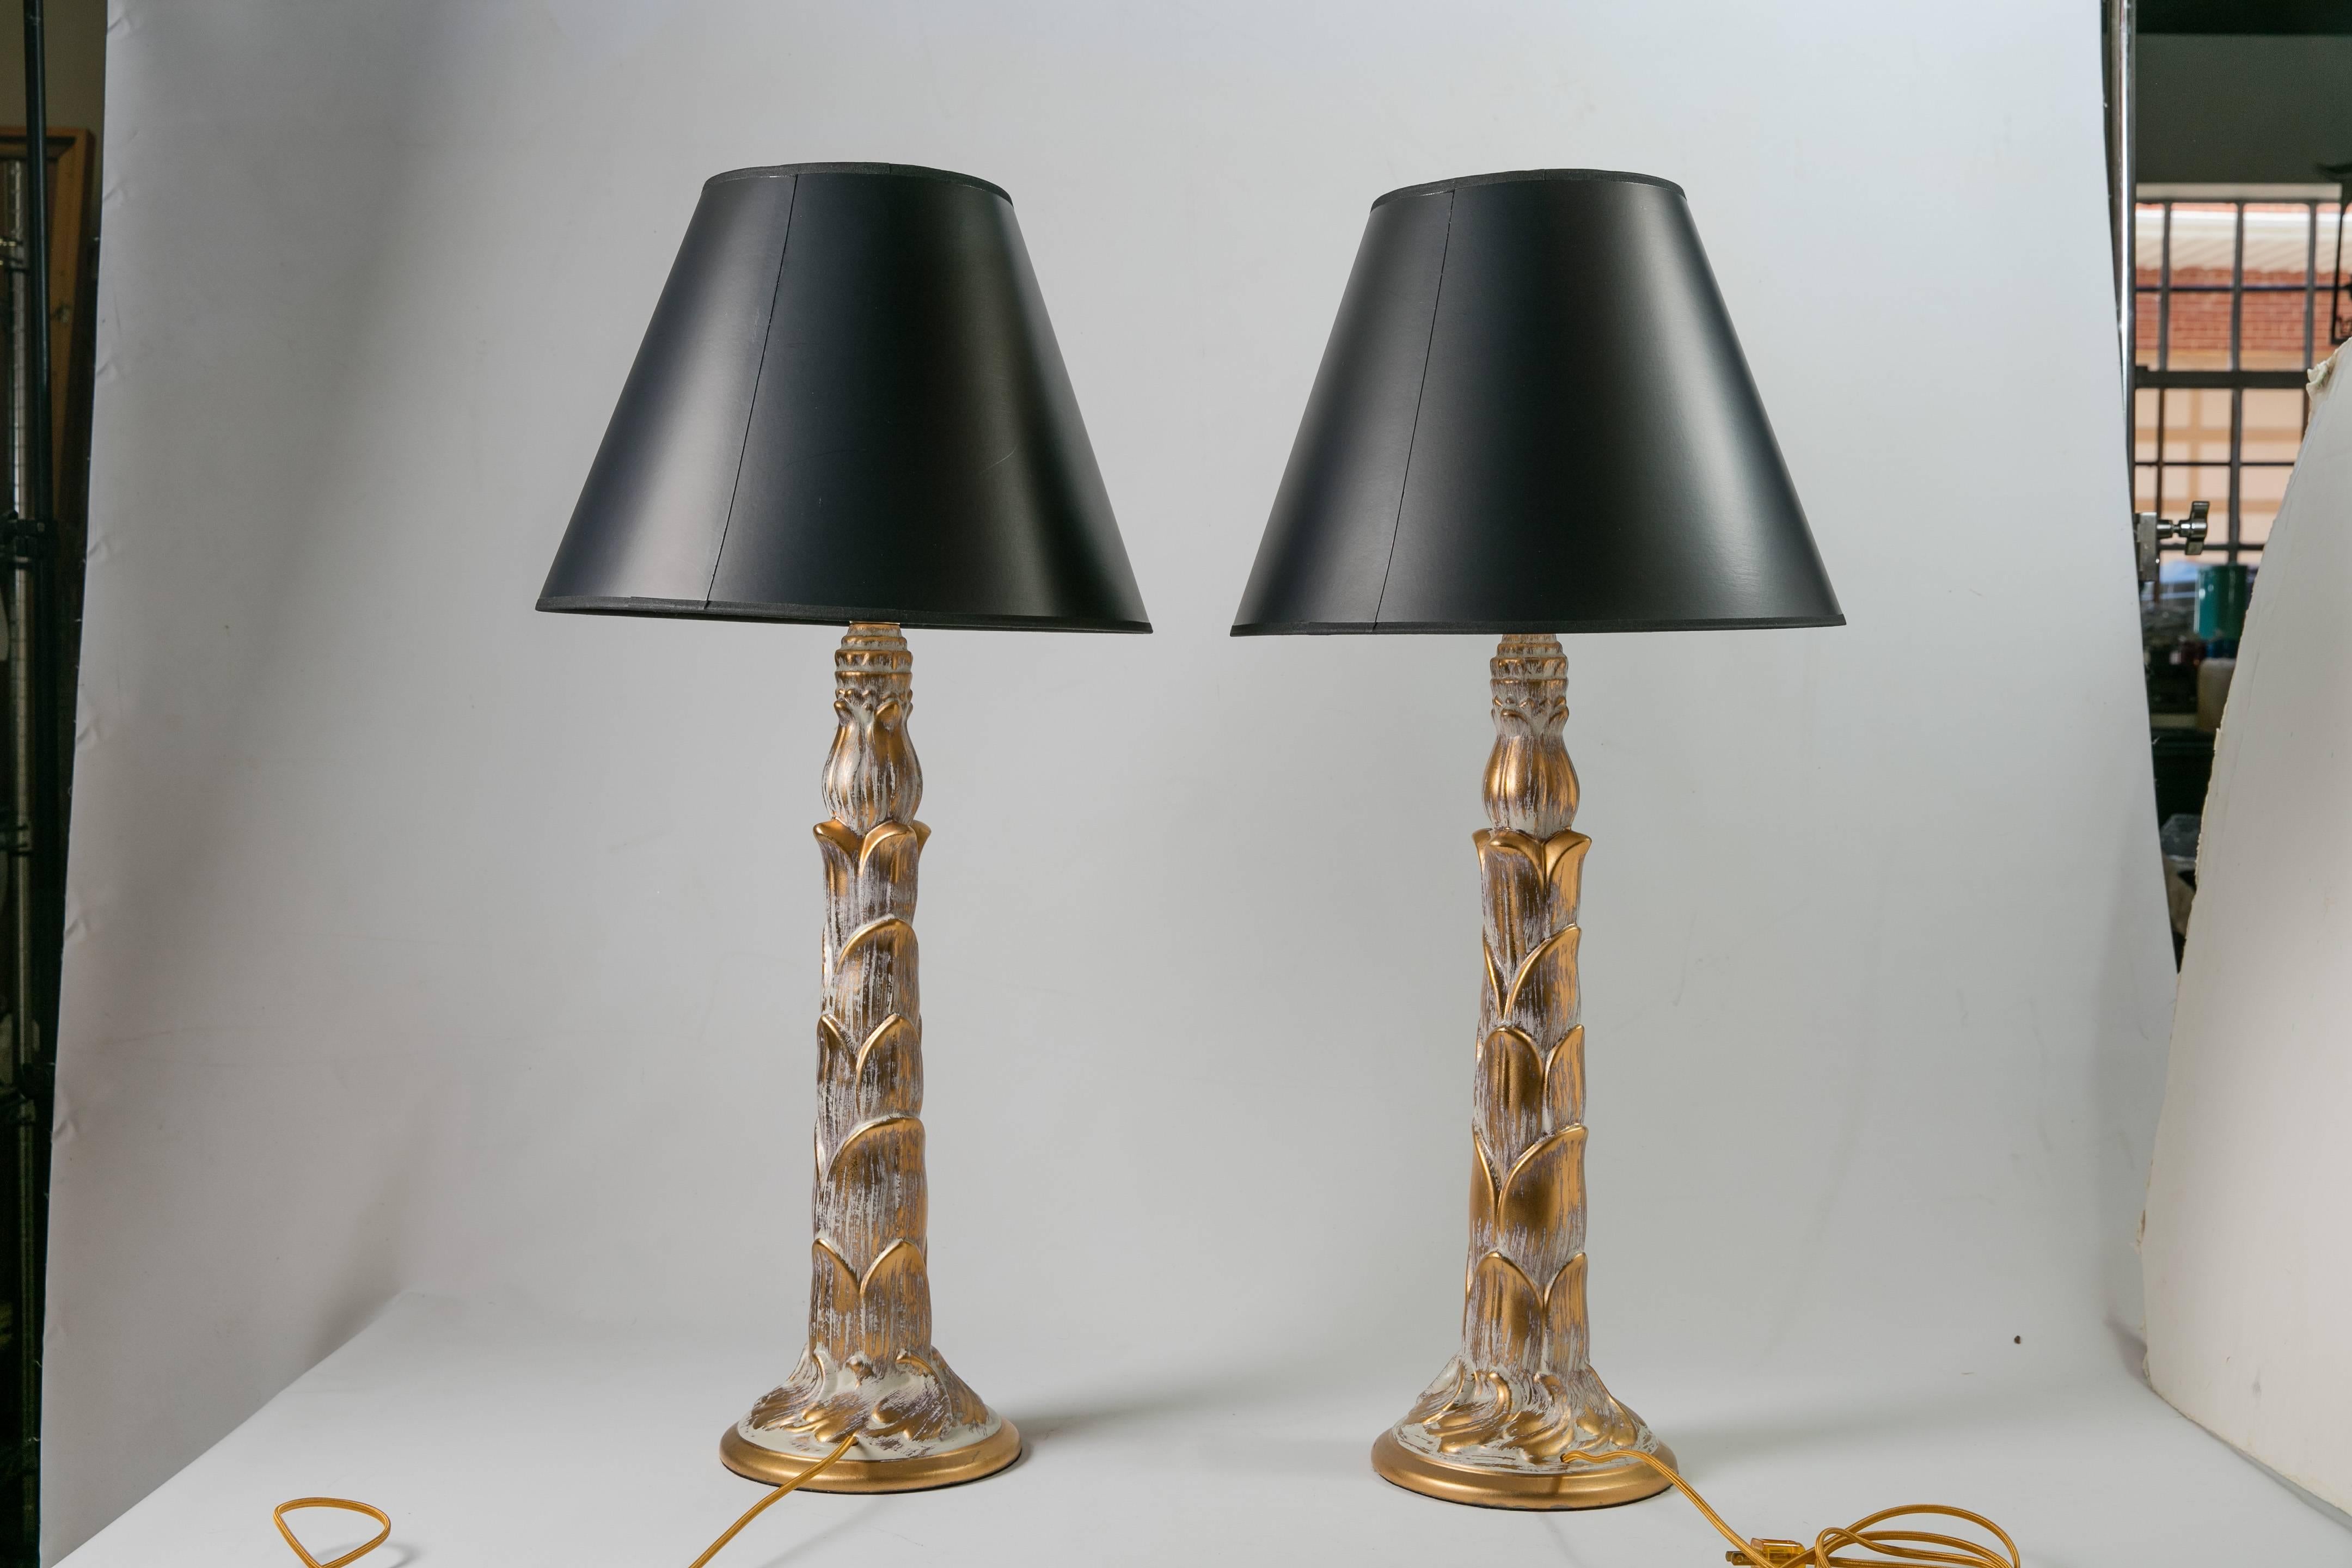 A pair of 1950s Hollywood Regency-style ceramic lamps with a white/grey wash and gilt highlights in the manner of James Mont. The lamps' shape is modeled on the trunk of a palm tree. Each lamp is newly wired with gold silk cords. Each lamp requires